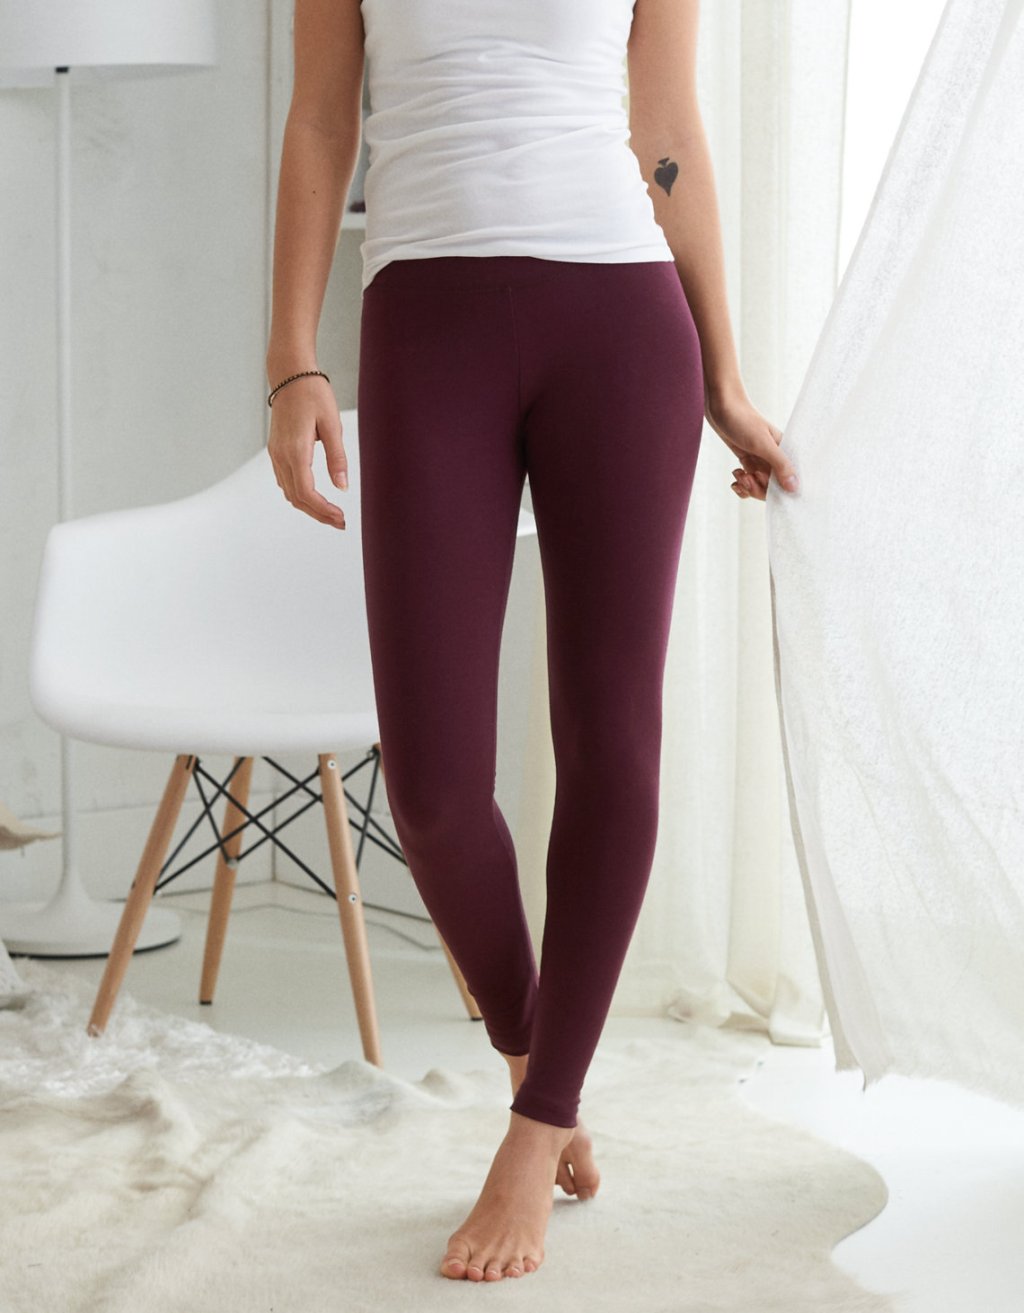 American Eagle Outfitters Leggings ONLY $10